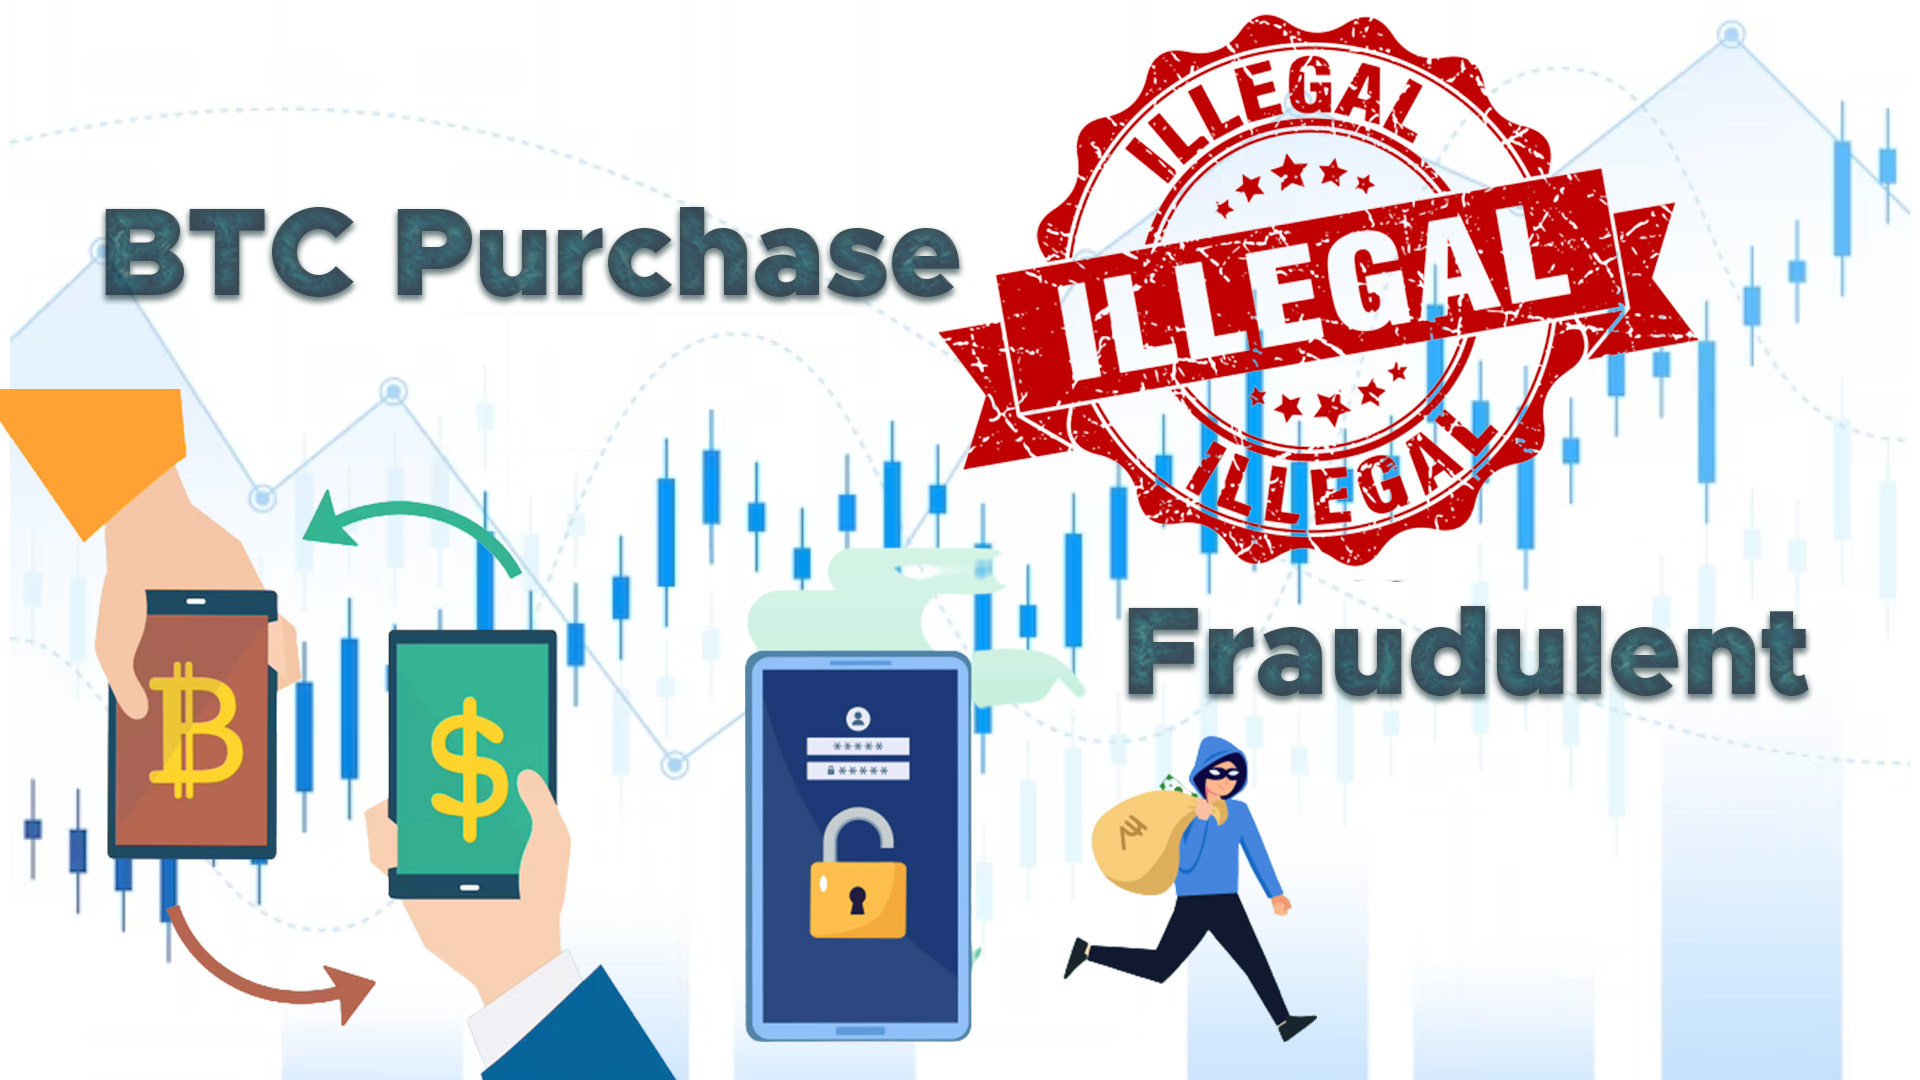 BTC Purchase Found to be Fraudulent and Illegal 